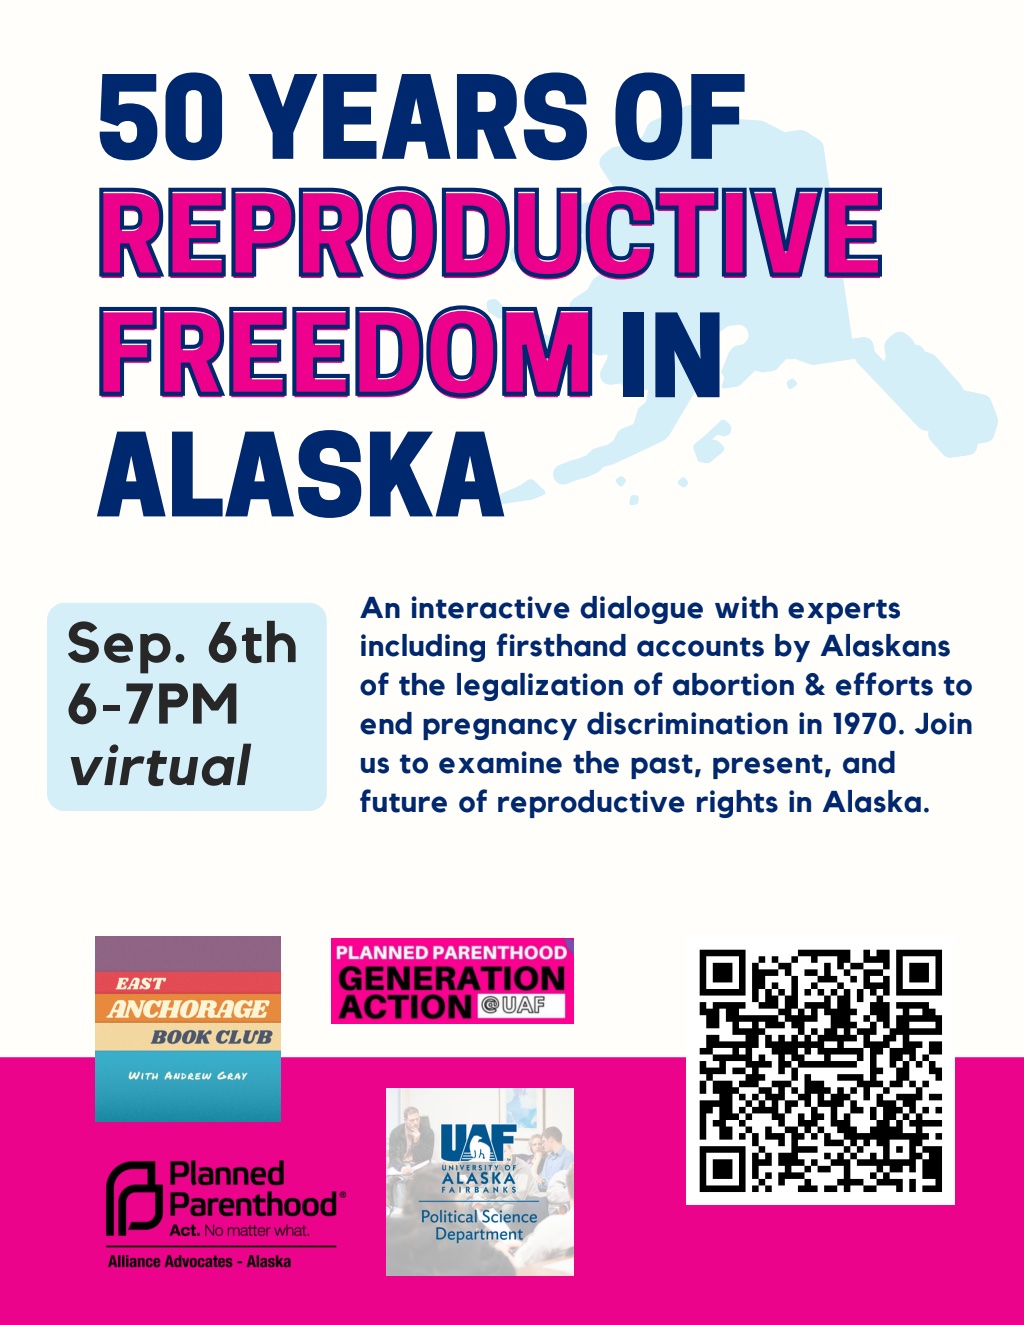 50 Years of Reproductive Freedom in Alaska